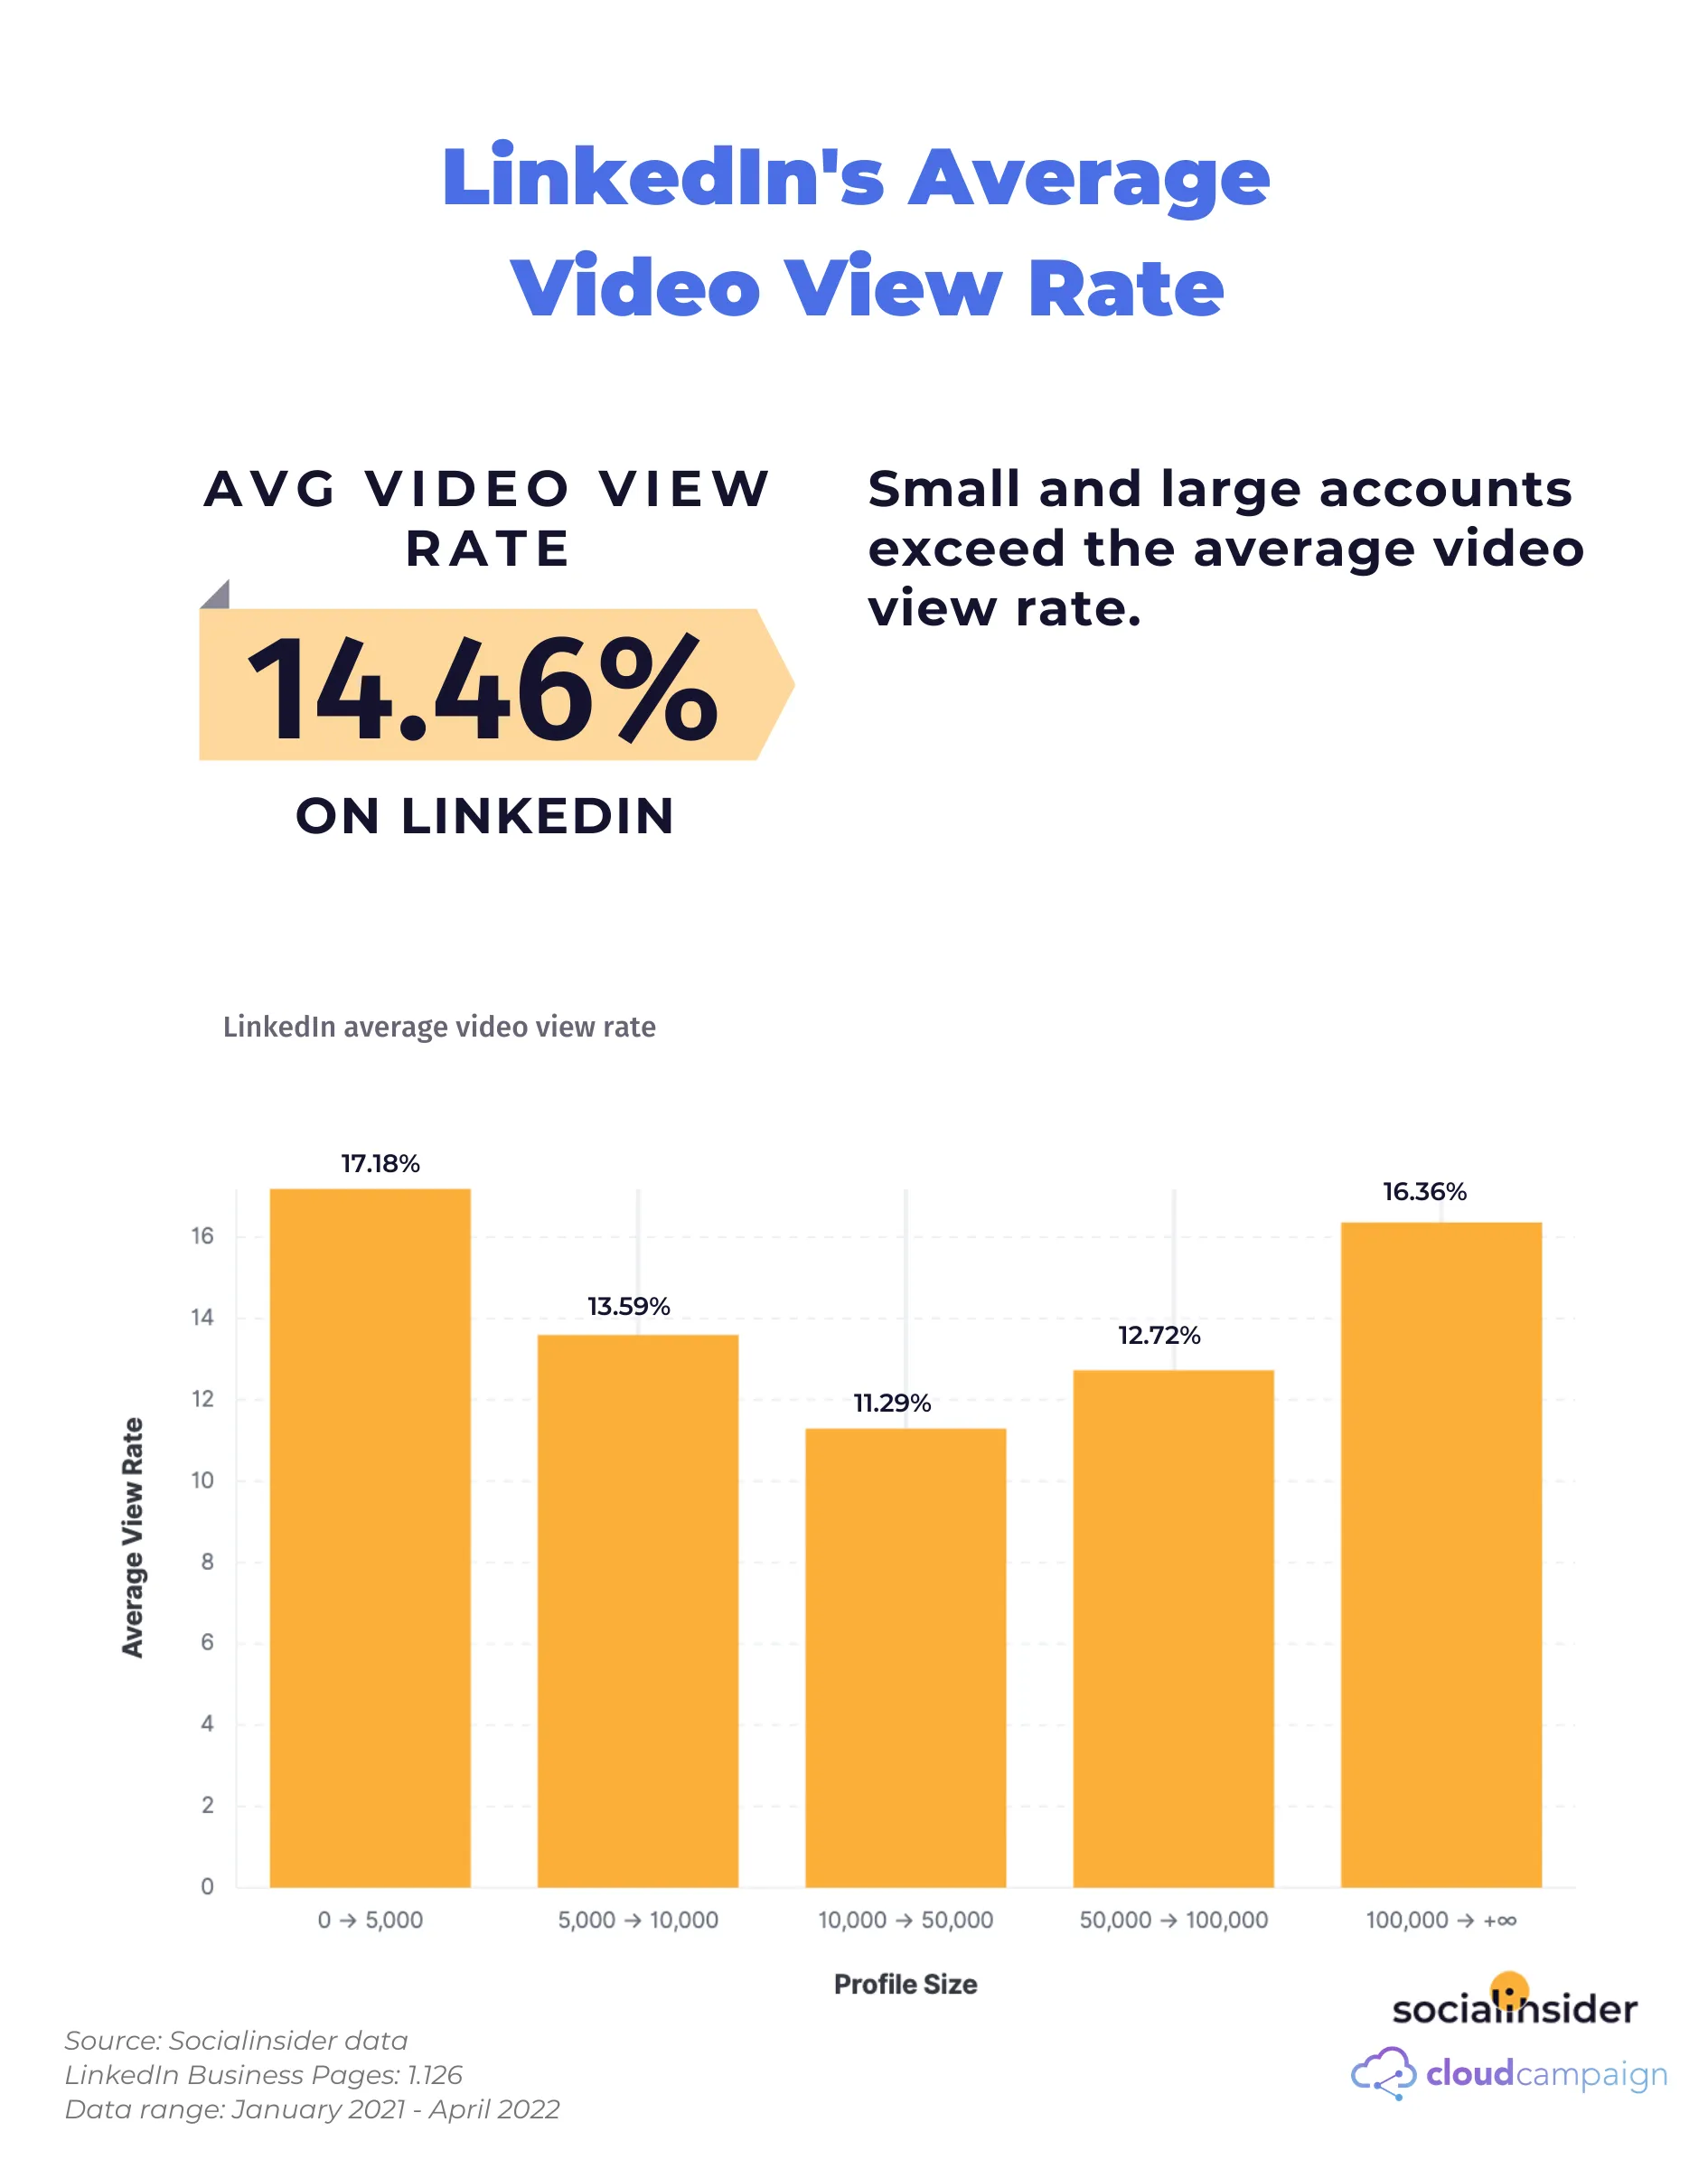 LinkedIn video view rate